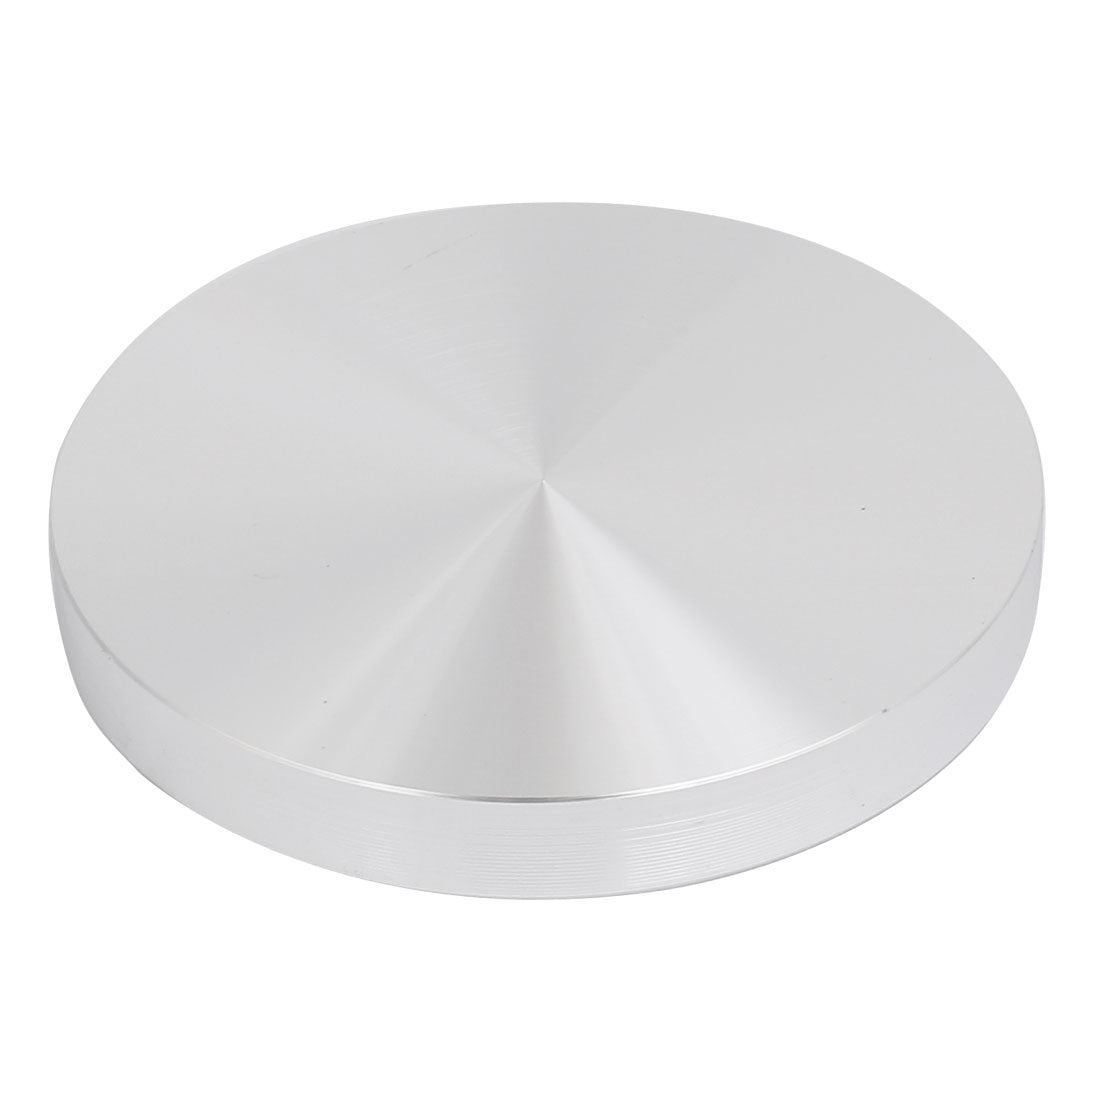 uxcell Uxcell 75mm Diameter 10mm Thickness M8 Thread Hollow Aluminum Disc Polished Finish